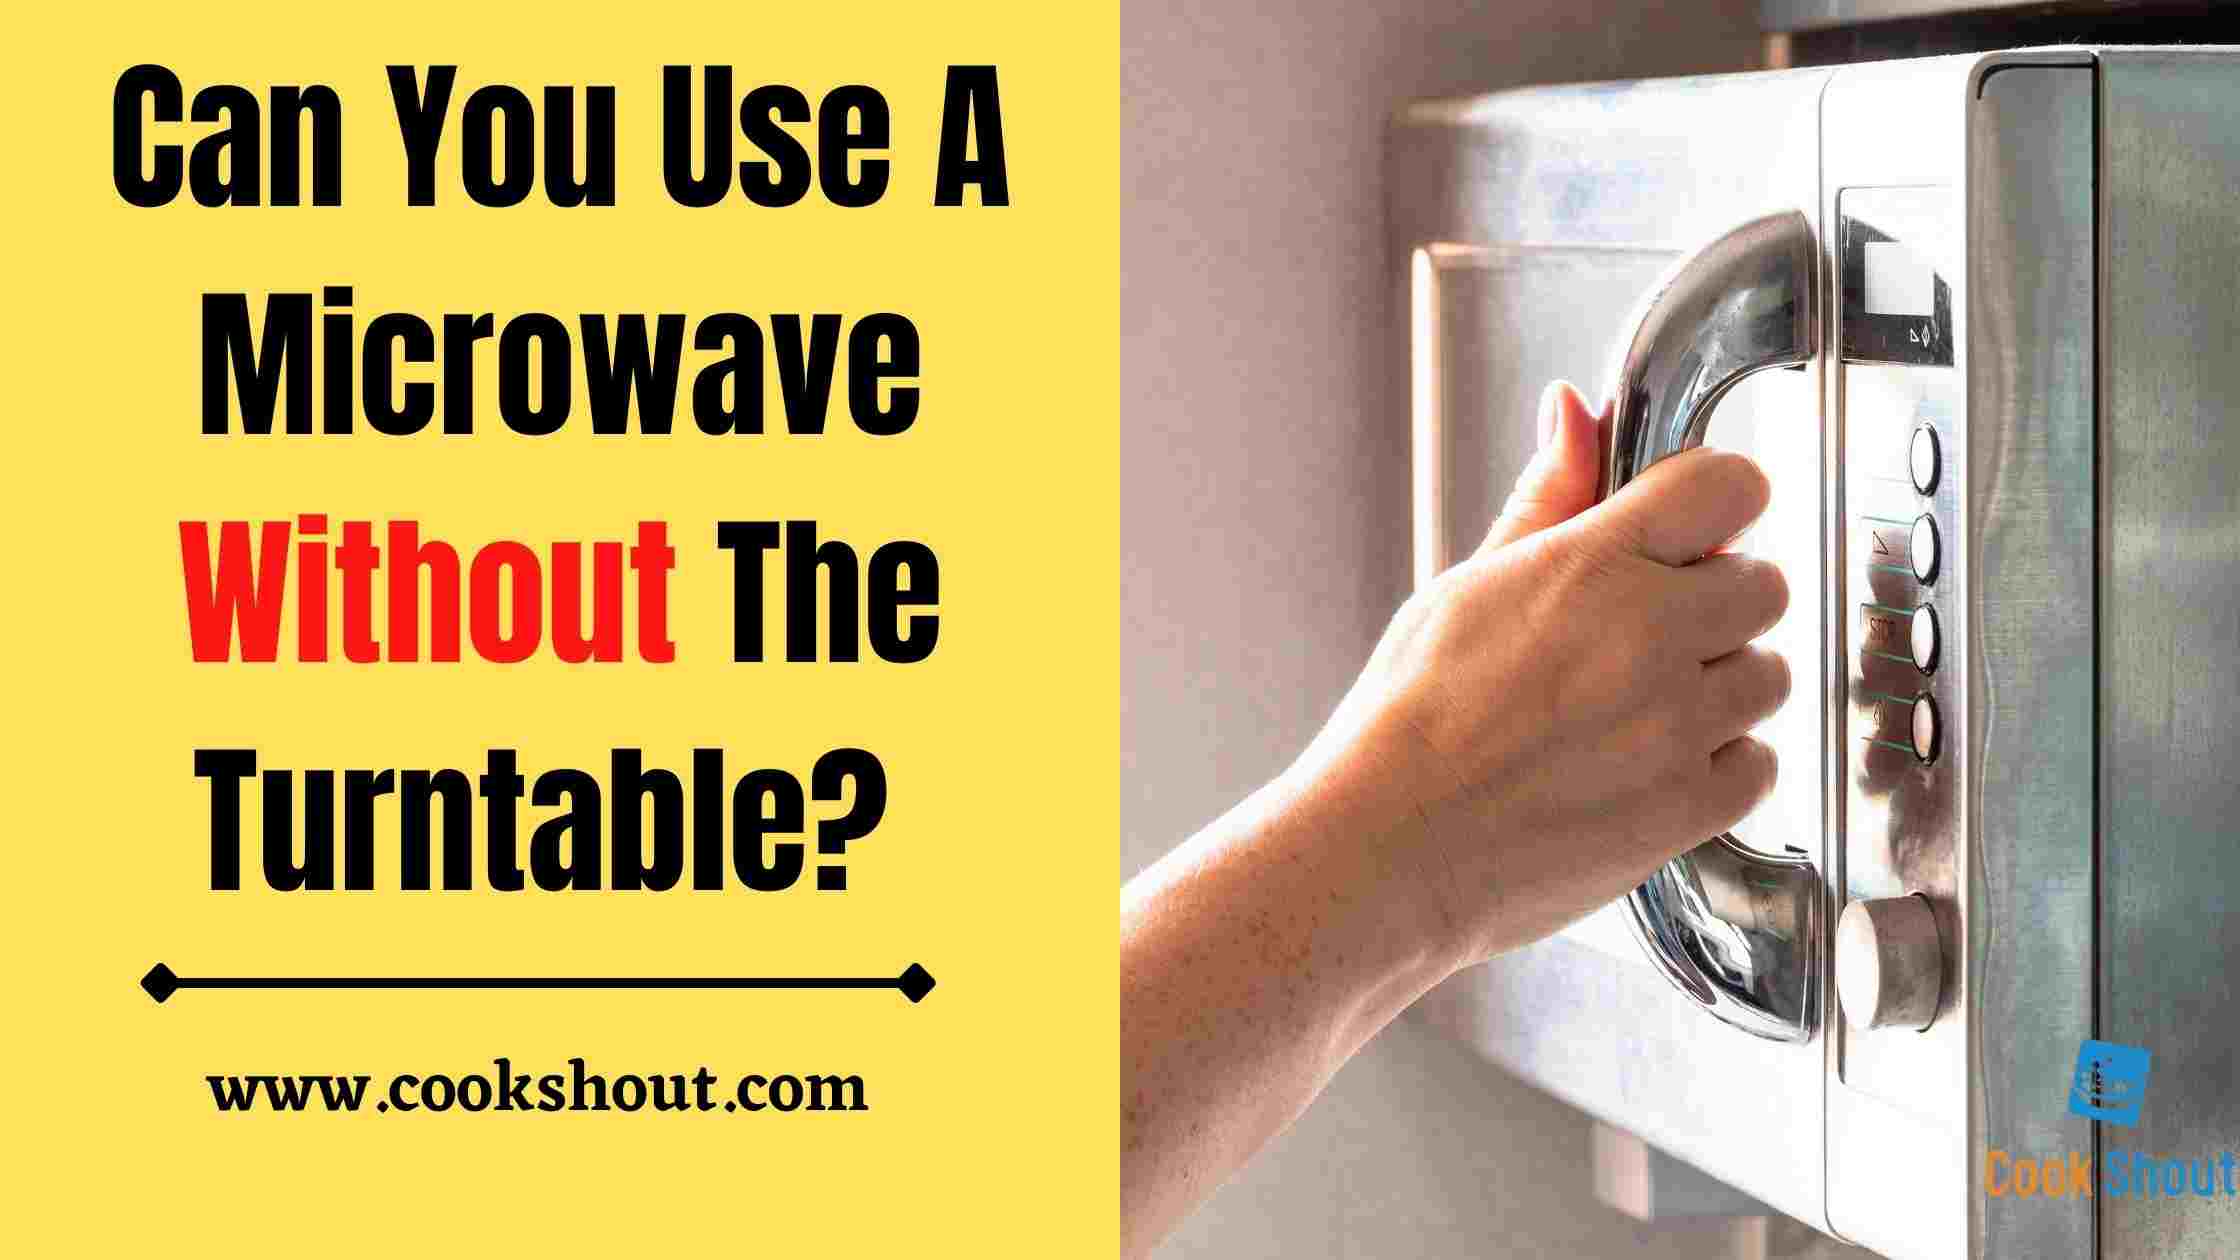 Can You Use A Microwave Without The Turntable